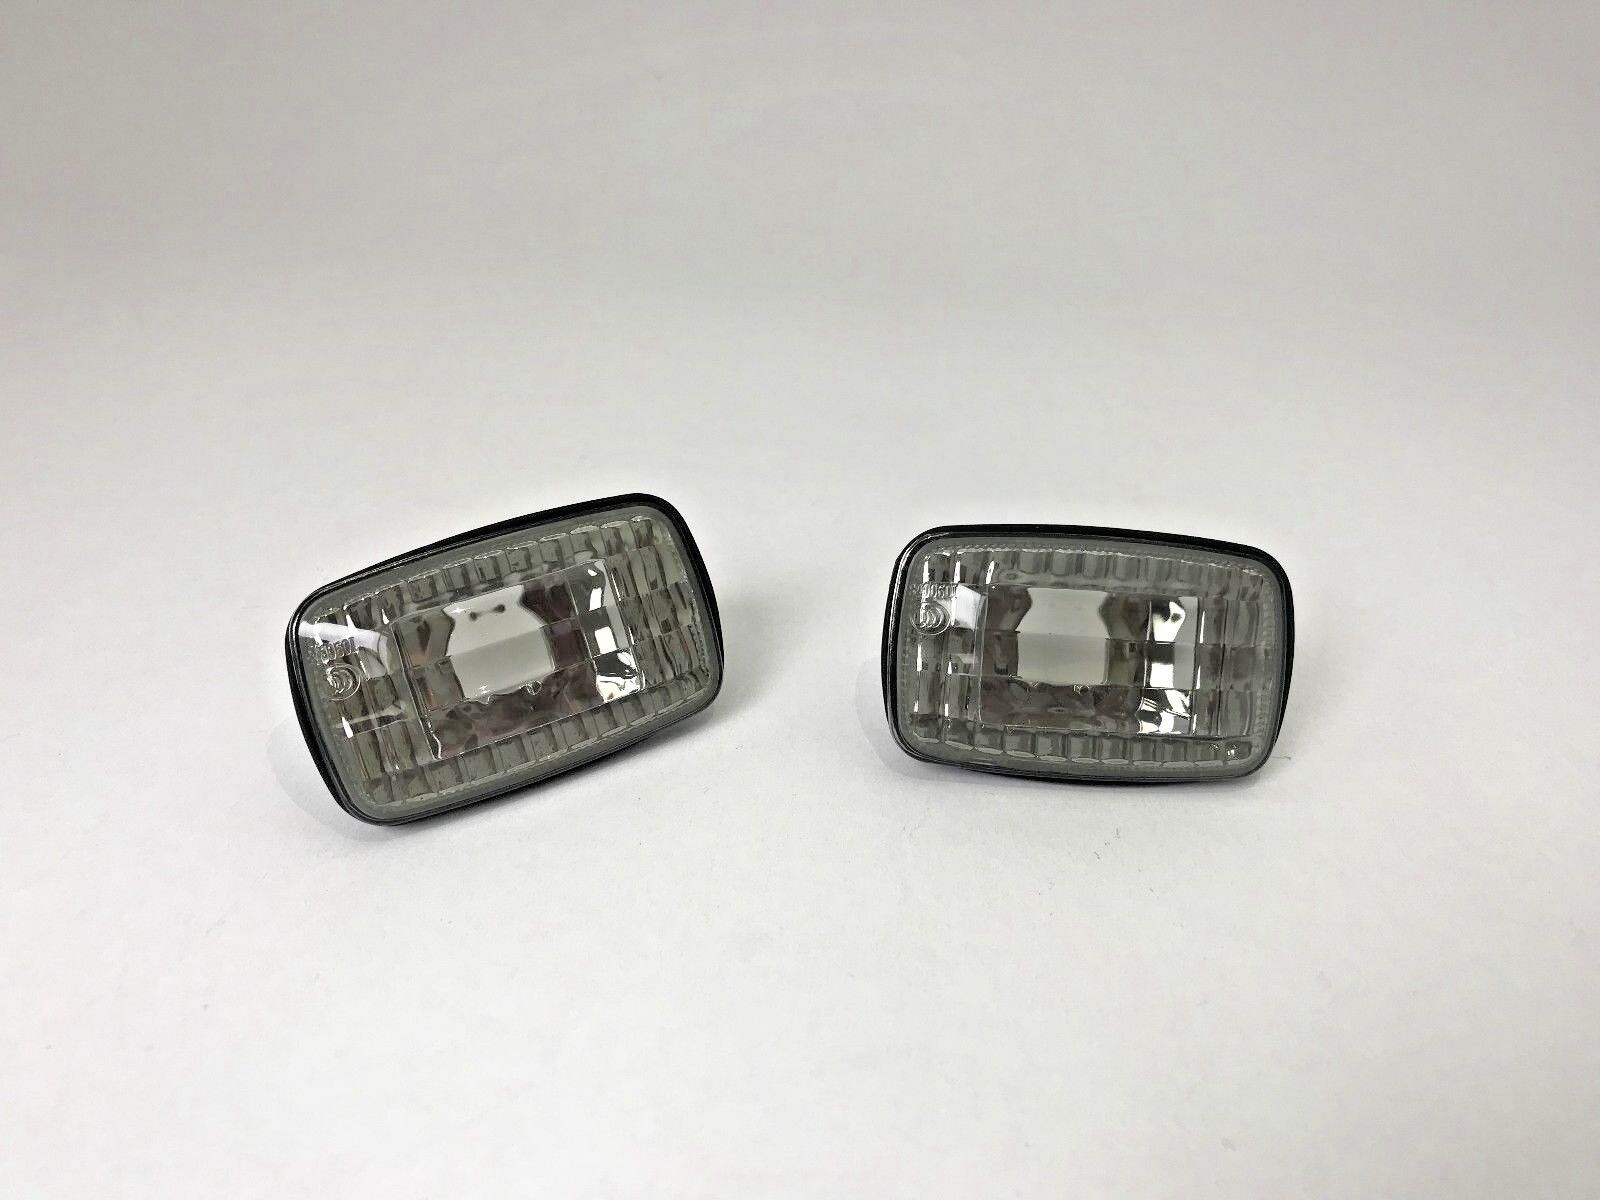 Primary image for Fit For Toyota Hilux LX470 Land Cruiser Prado Side Indicator Light Smoke Crystal